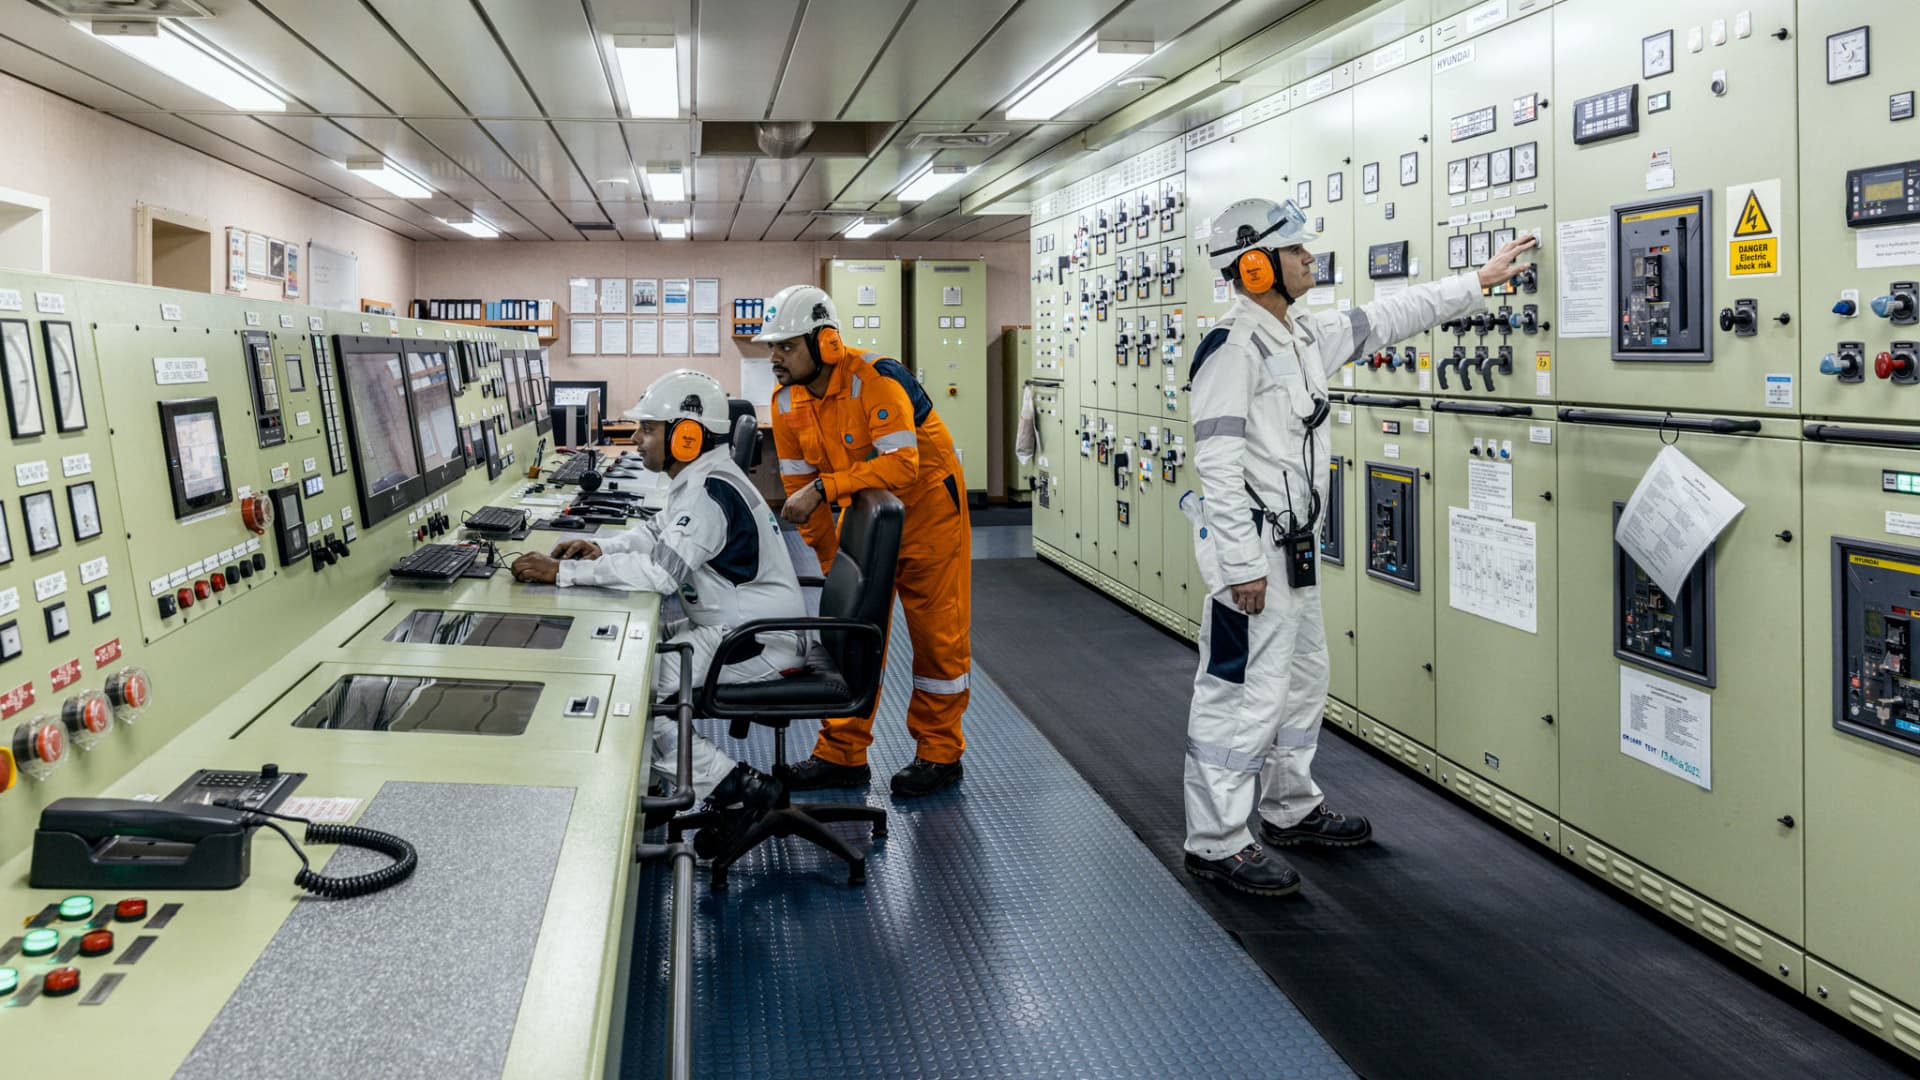 The engine control room of an oil tanker. Hafnia Chief Engineer Dmytro Lifarenko spent around six months on board during the Covid-19 pandemic in 2020.